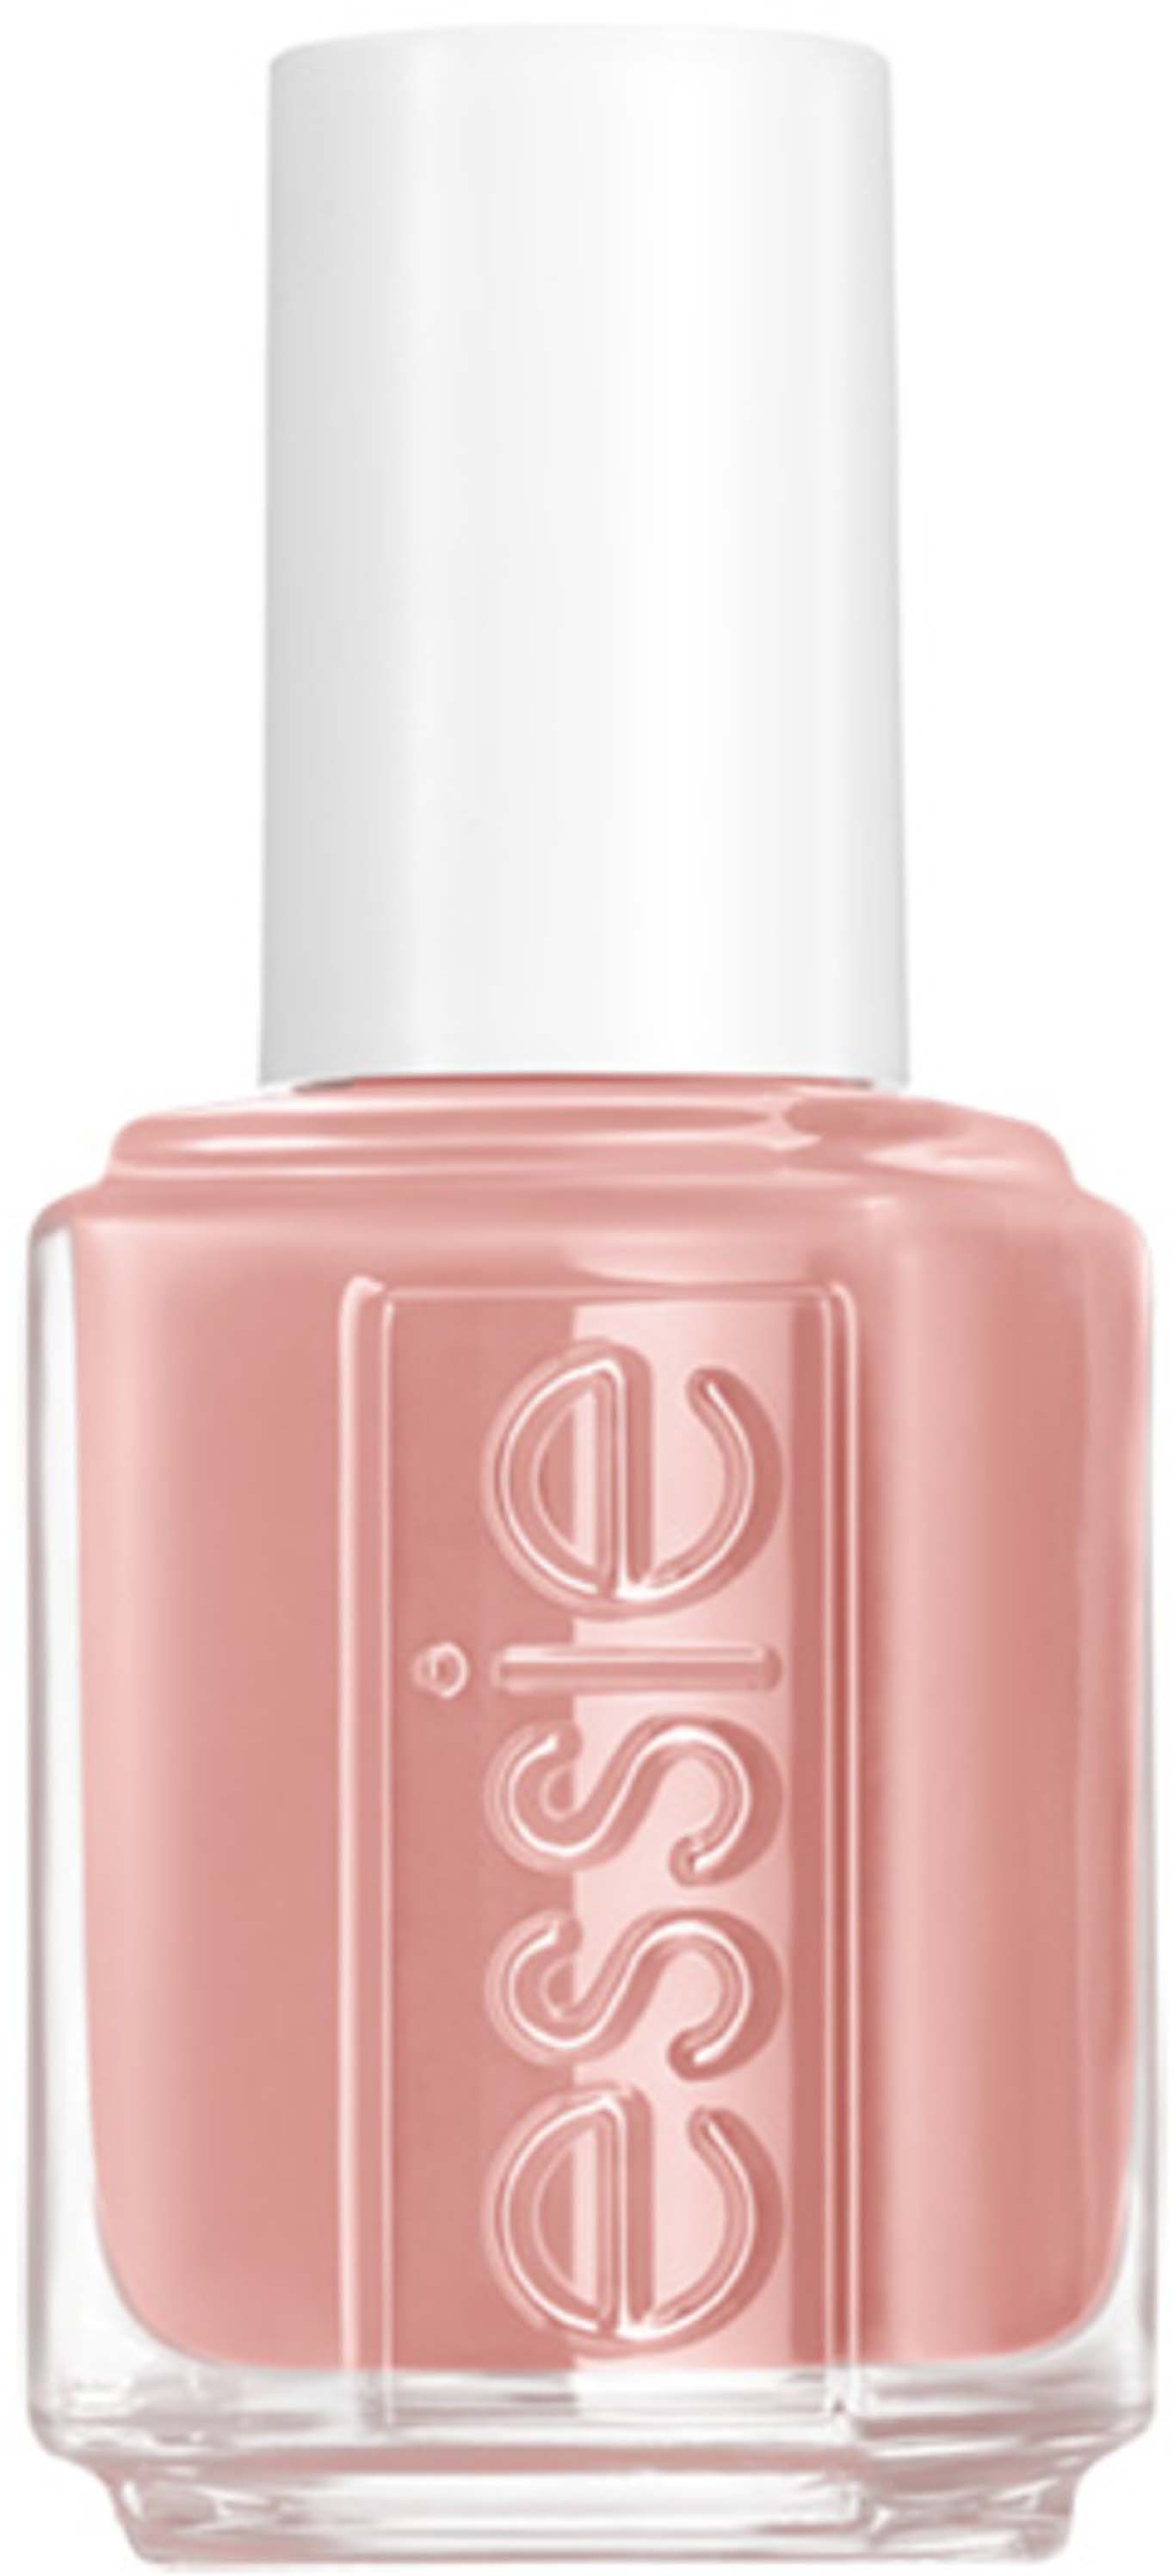 Essie not red-y for bed 749 Is The Snuggle Nail Lacquer Real collection